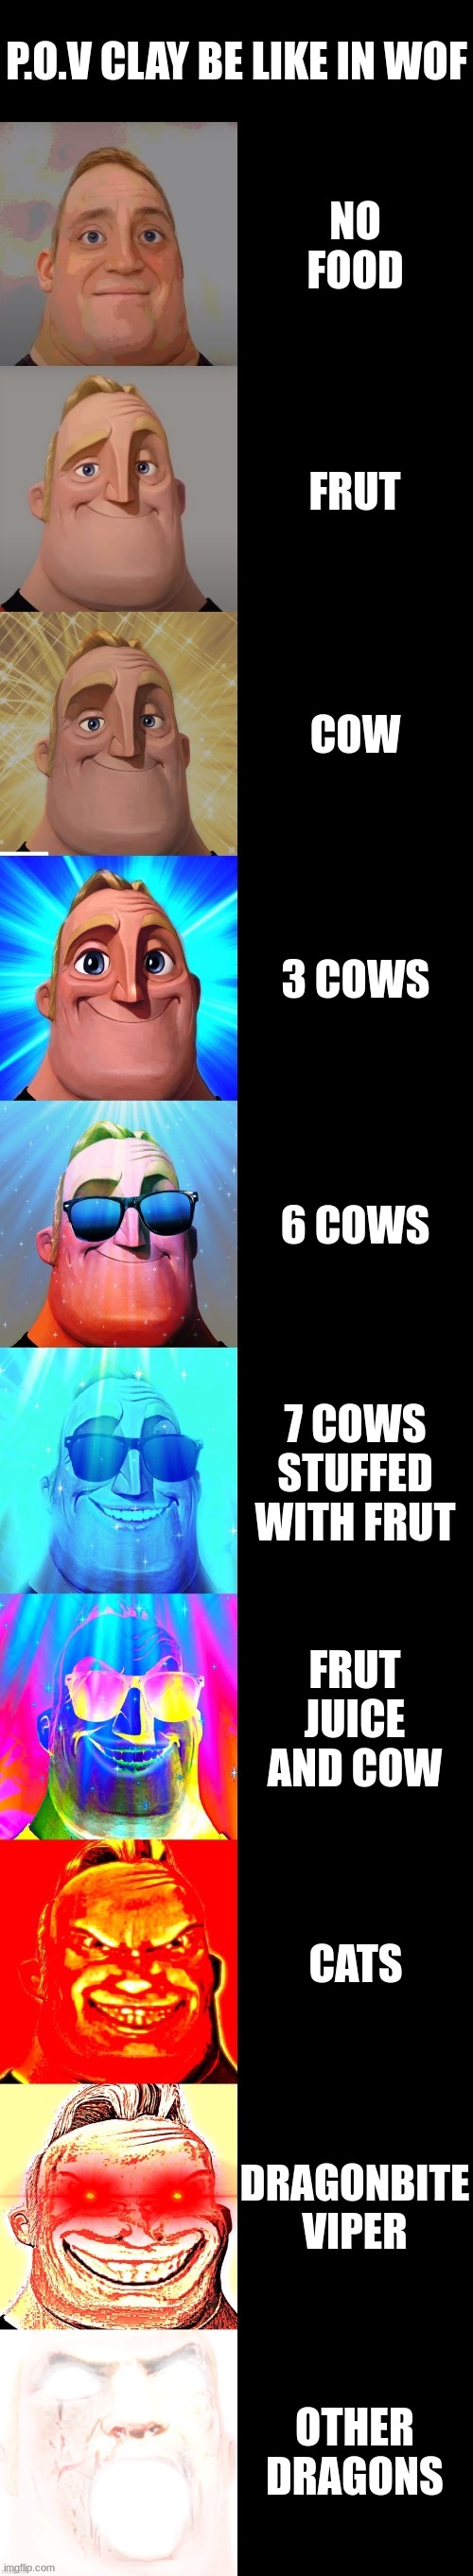 mr incredible becoming canny | P.O.V CLAY BE LIKE IN WOF; NO FOOD; FRUT; COW; 3 COWS; 6 COWS; 7 COWS STUFFED WITH FRUT; FRUT JUICE AND COW; CATS; DRAGONBITE VIPER; OTHER DRAGONS | image tagged in mr incredible becoming canny | made w/ Imgflip meme maker